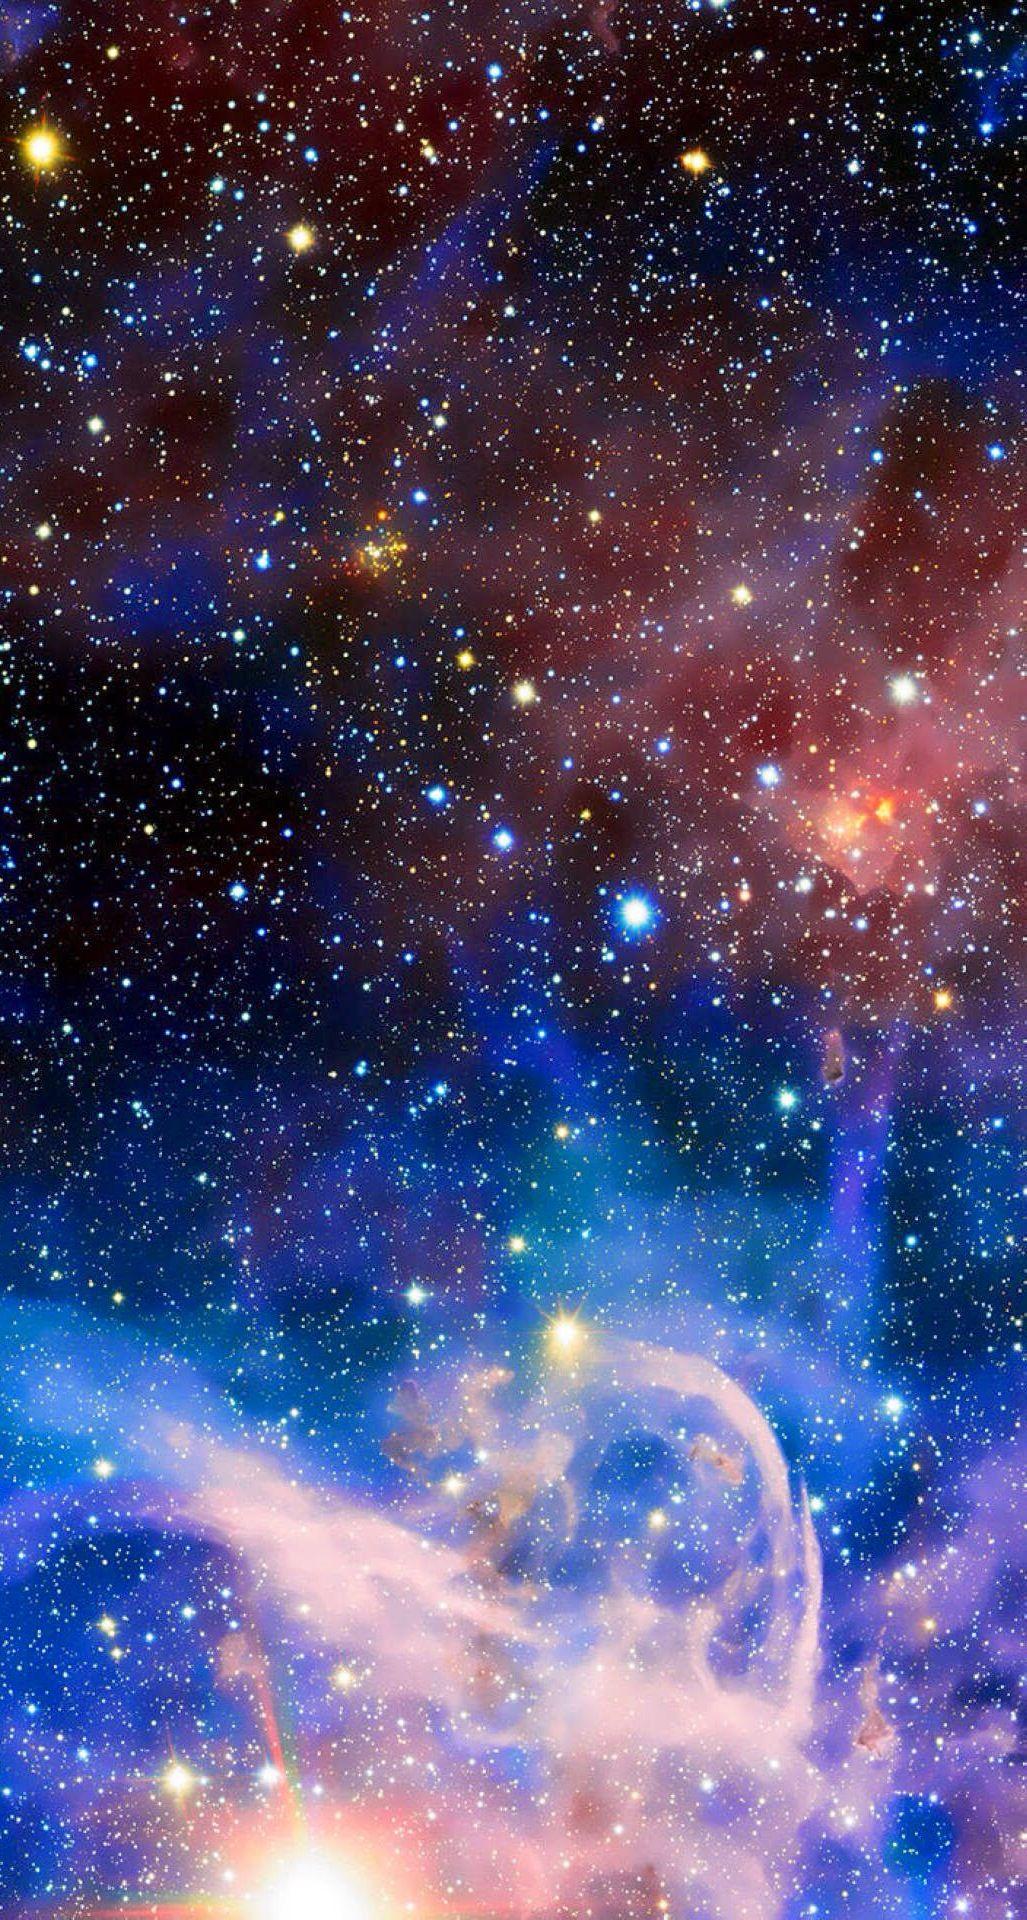 Universe. Tap image for more iPhone galaxy stars wallpaper